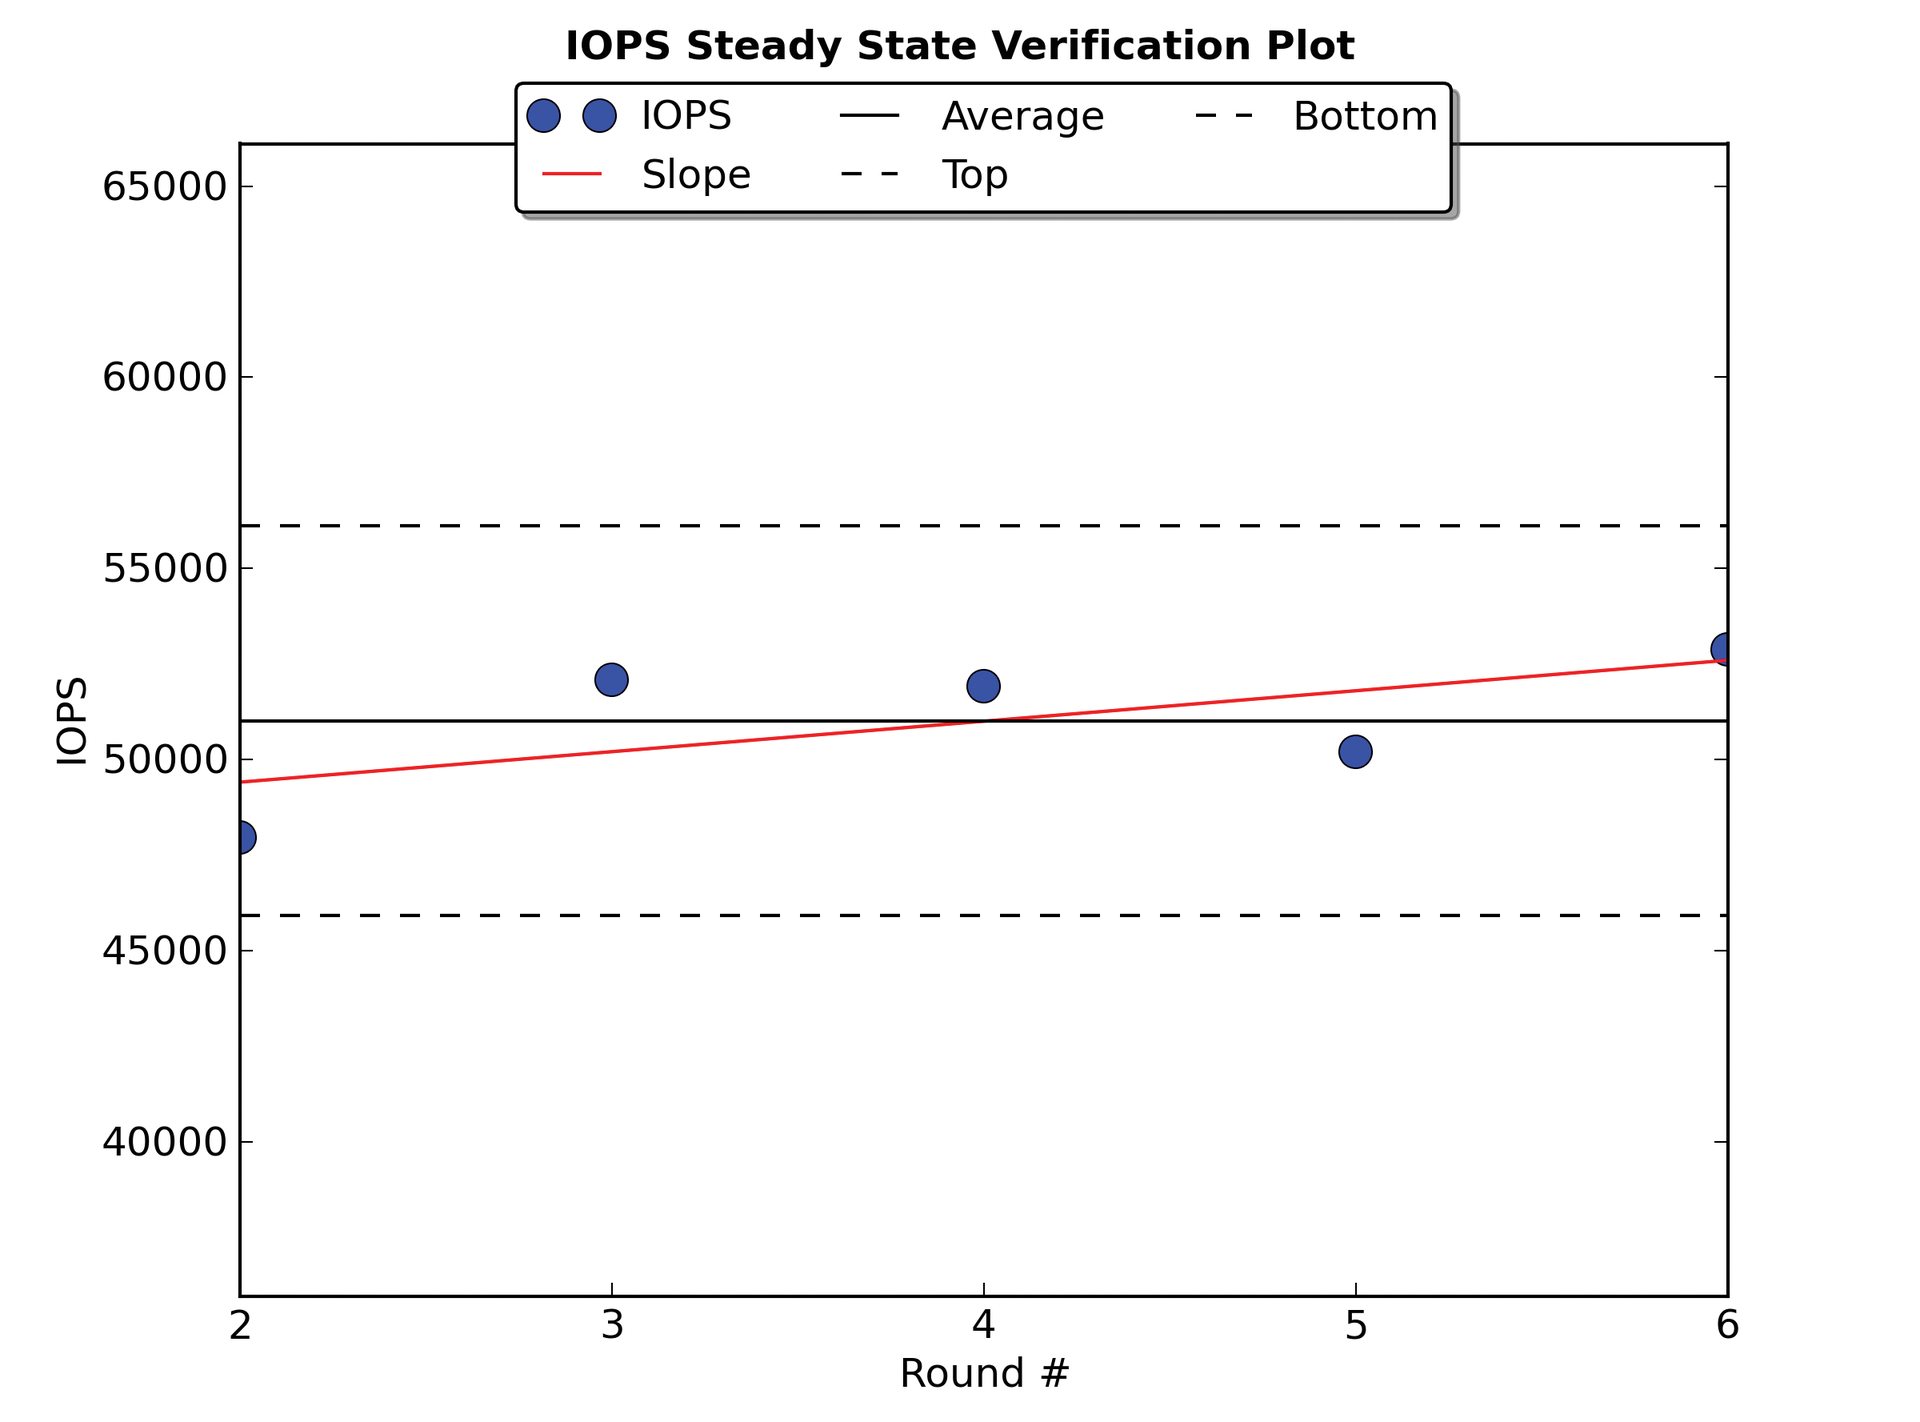 The steady state verification plot demonstrates the stable state of the SSD, which must be achieved in a test setup so that the results meet the specification. 